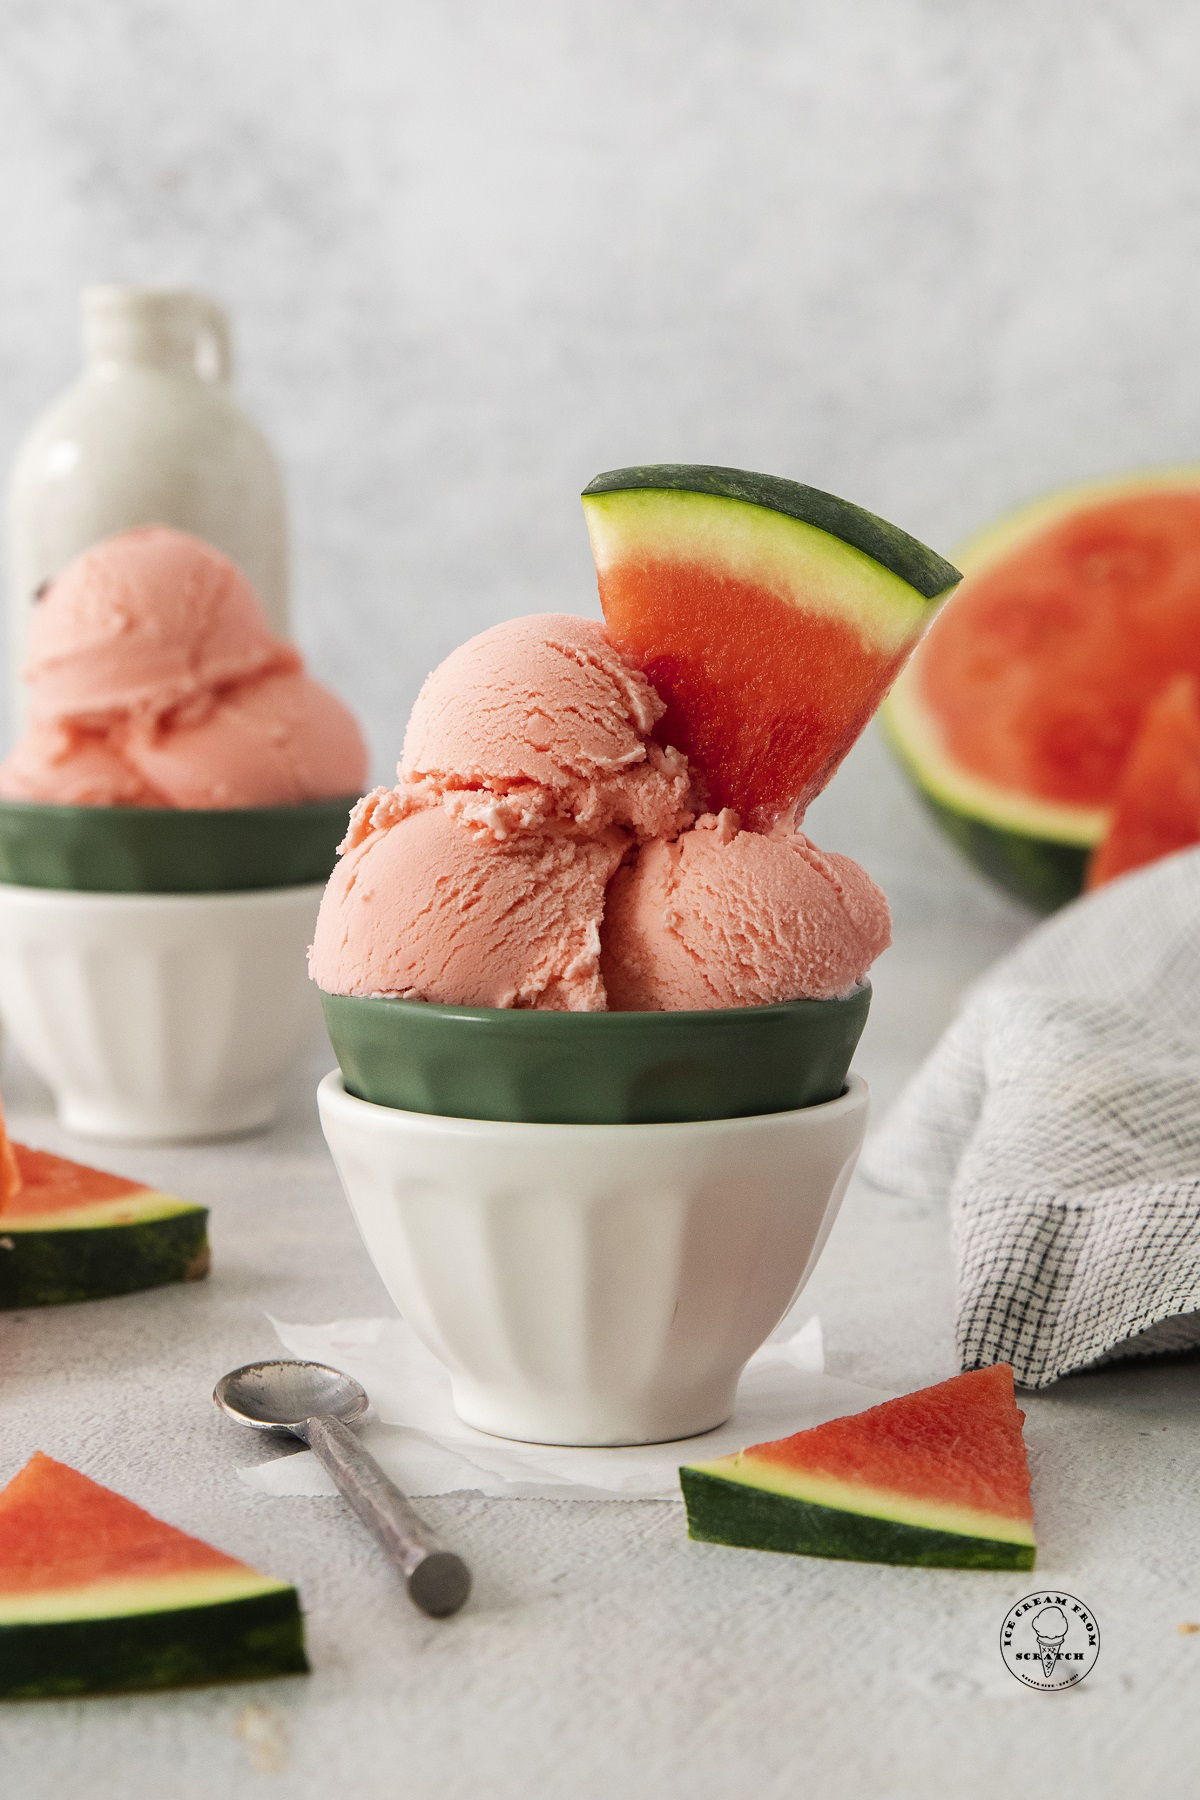 a ceramic bowl filled with scoops of homemade watermelon ice cream. Wedges of fresh watermelon are used as a garnish.